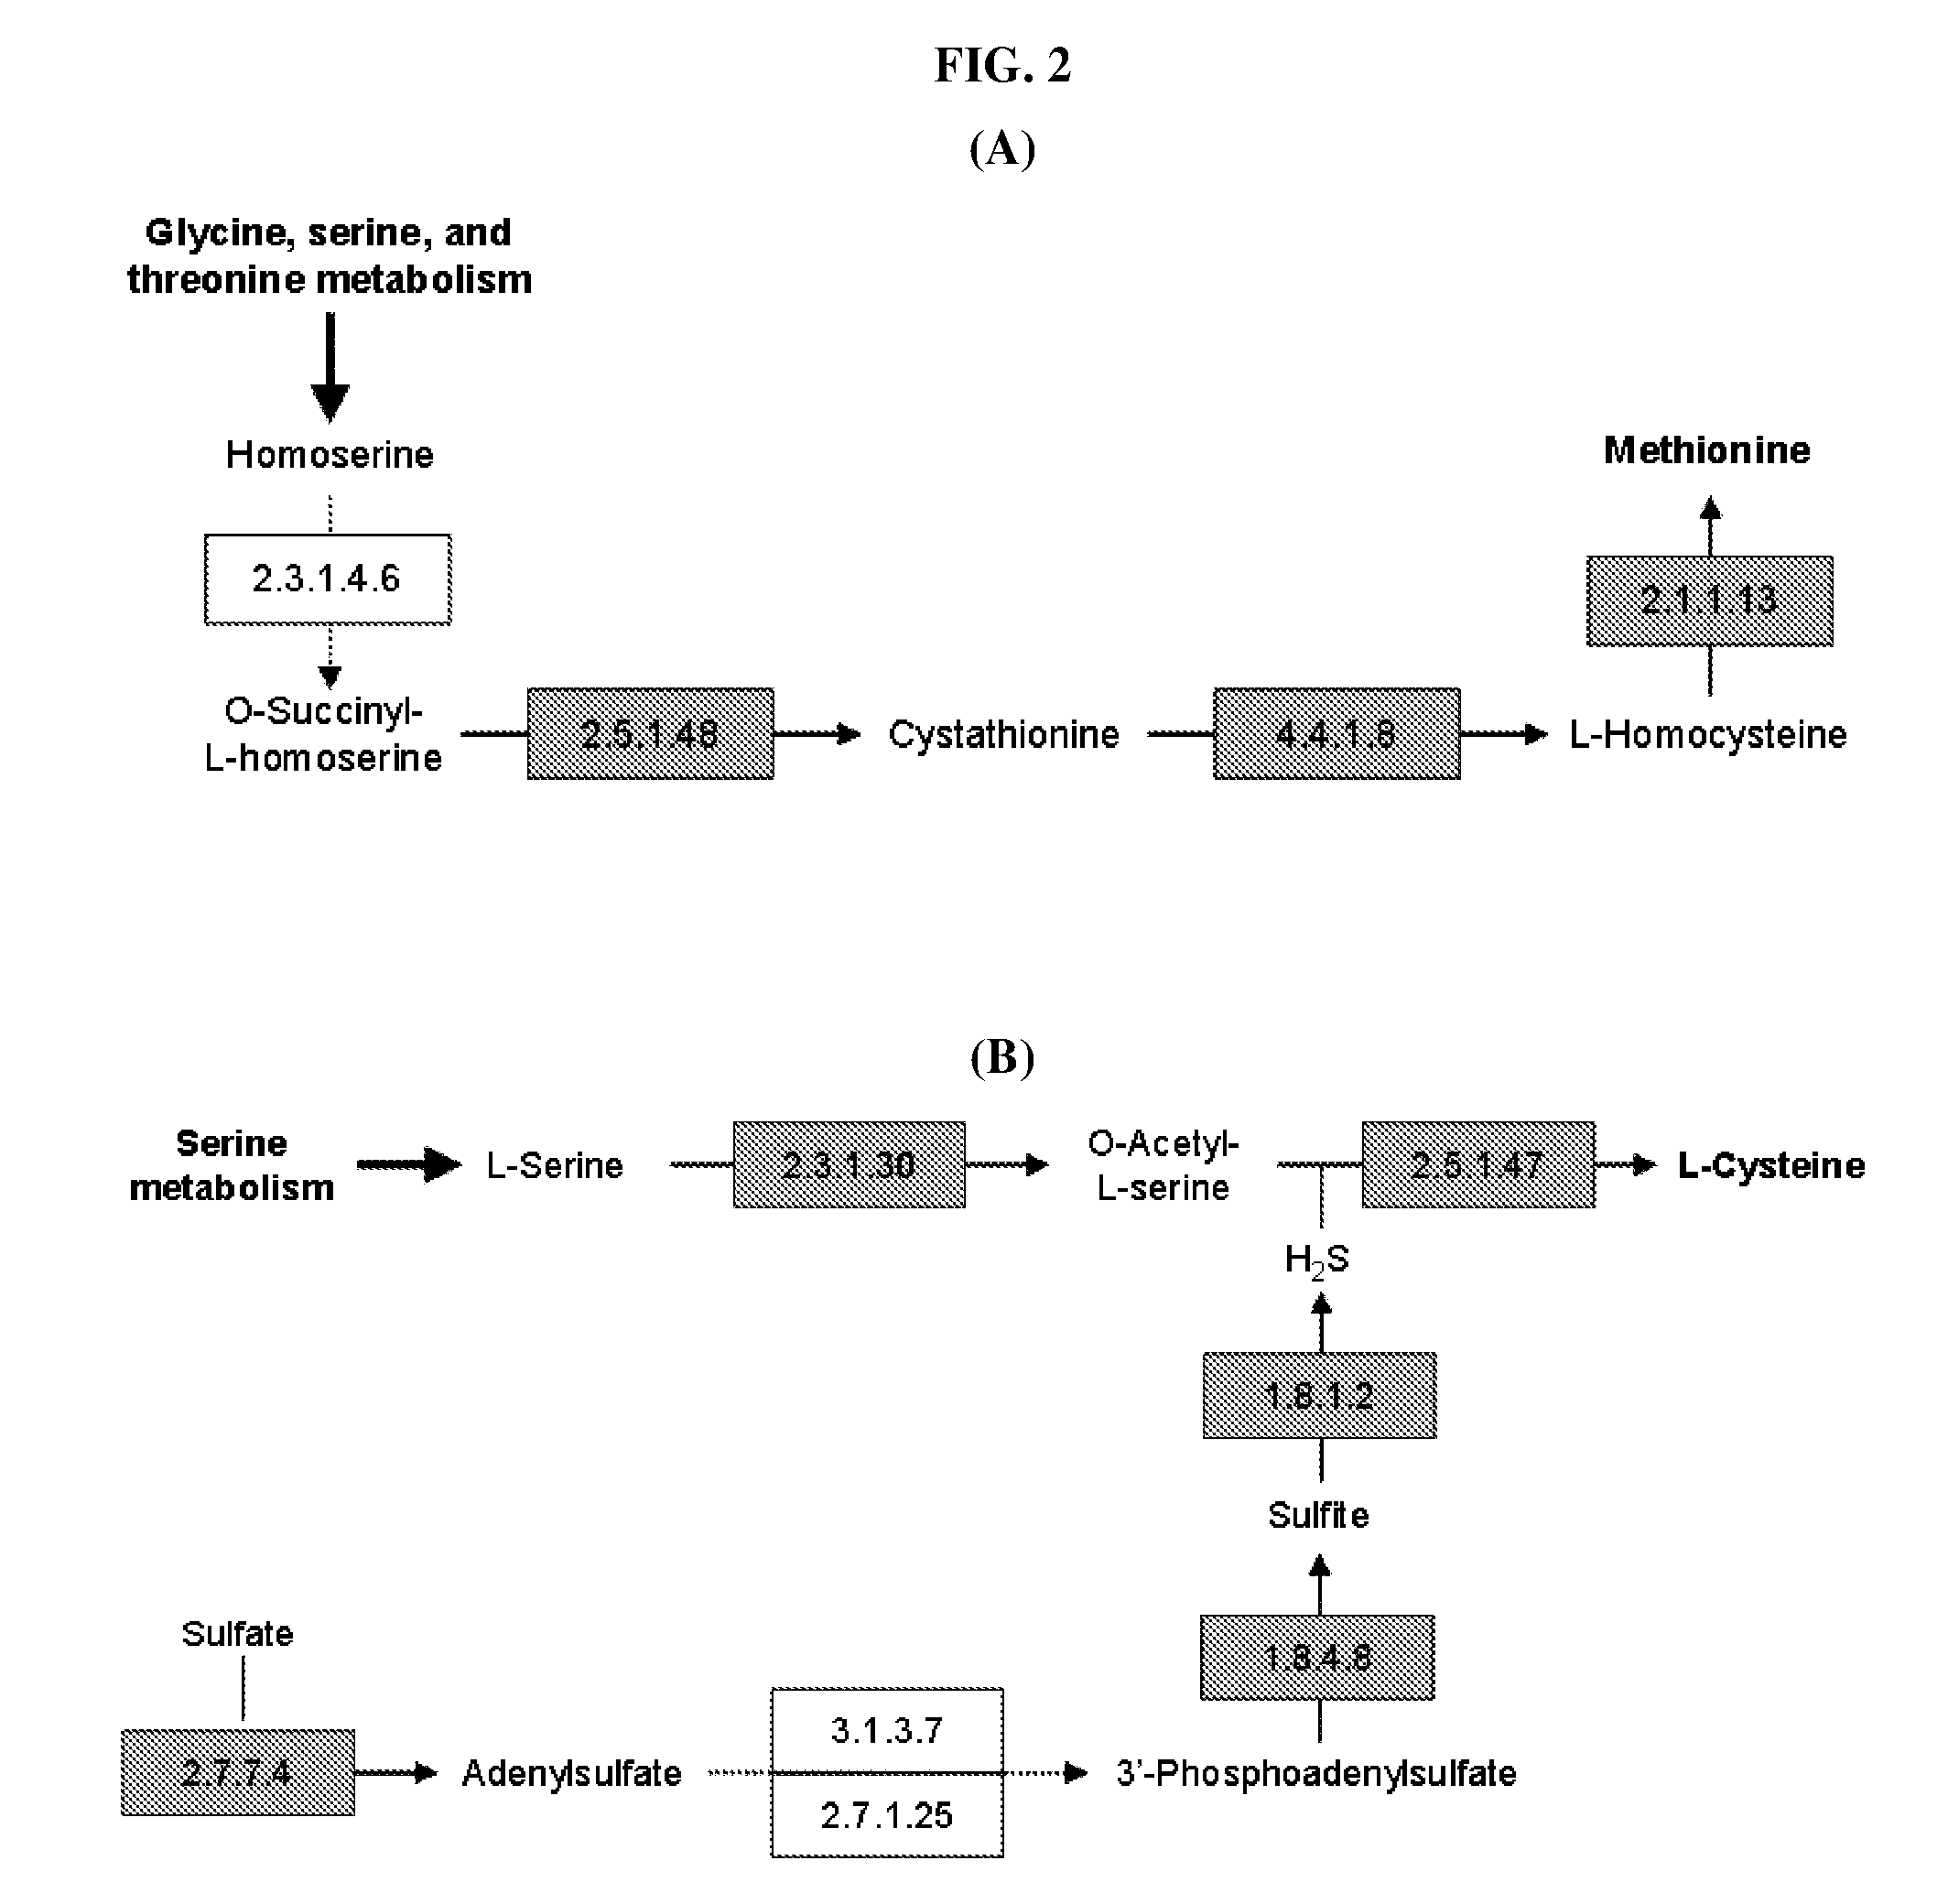 Method for developing culture medium using genome information and in silico analysis